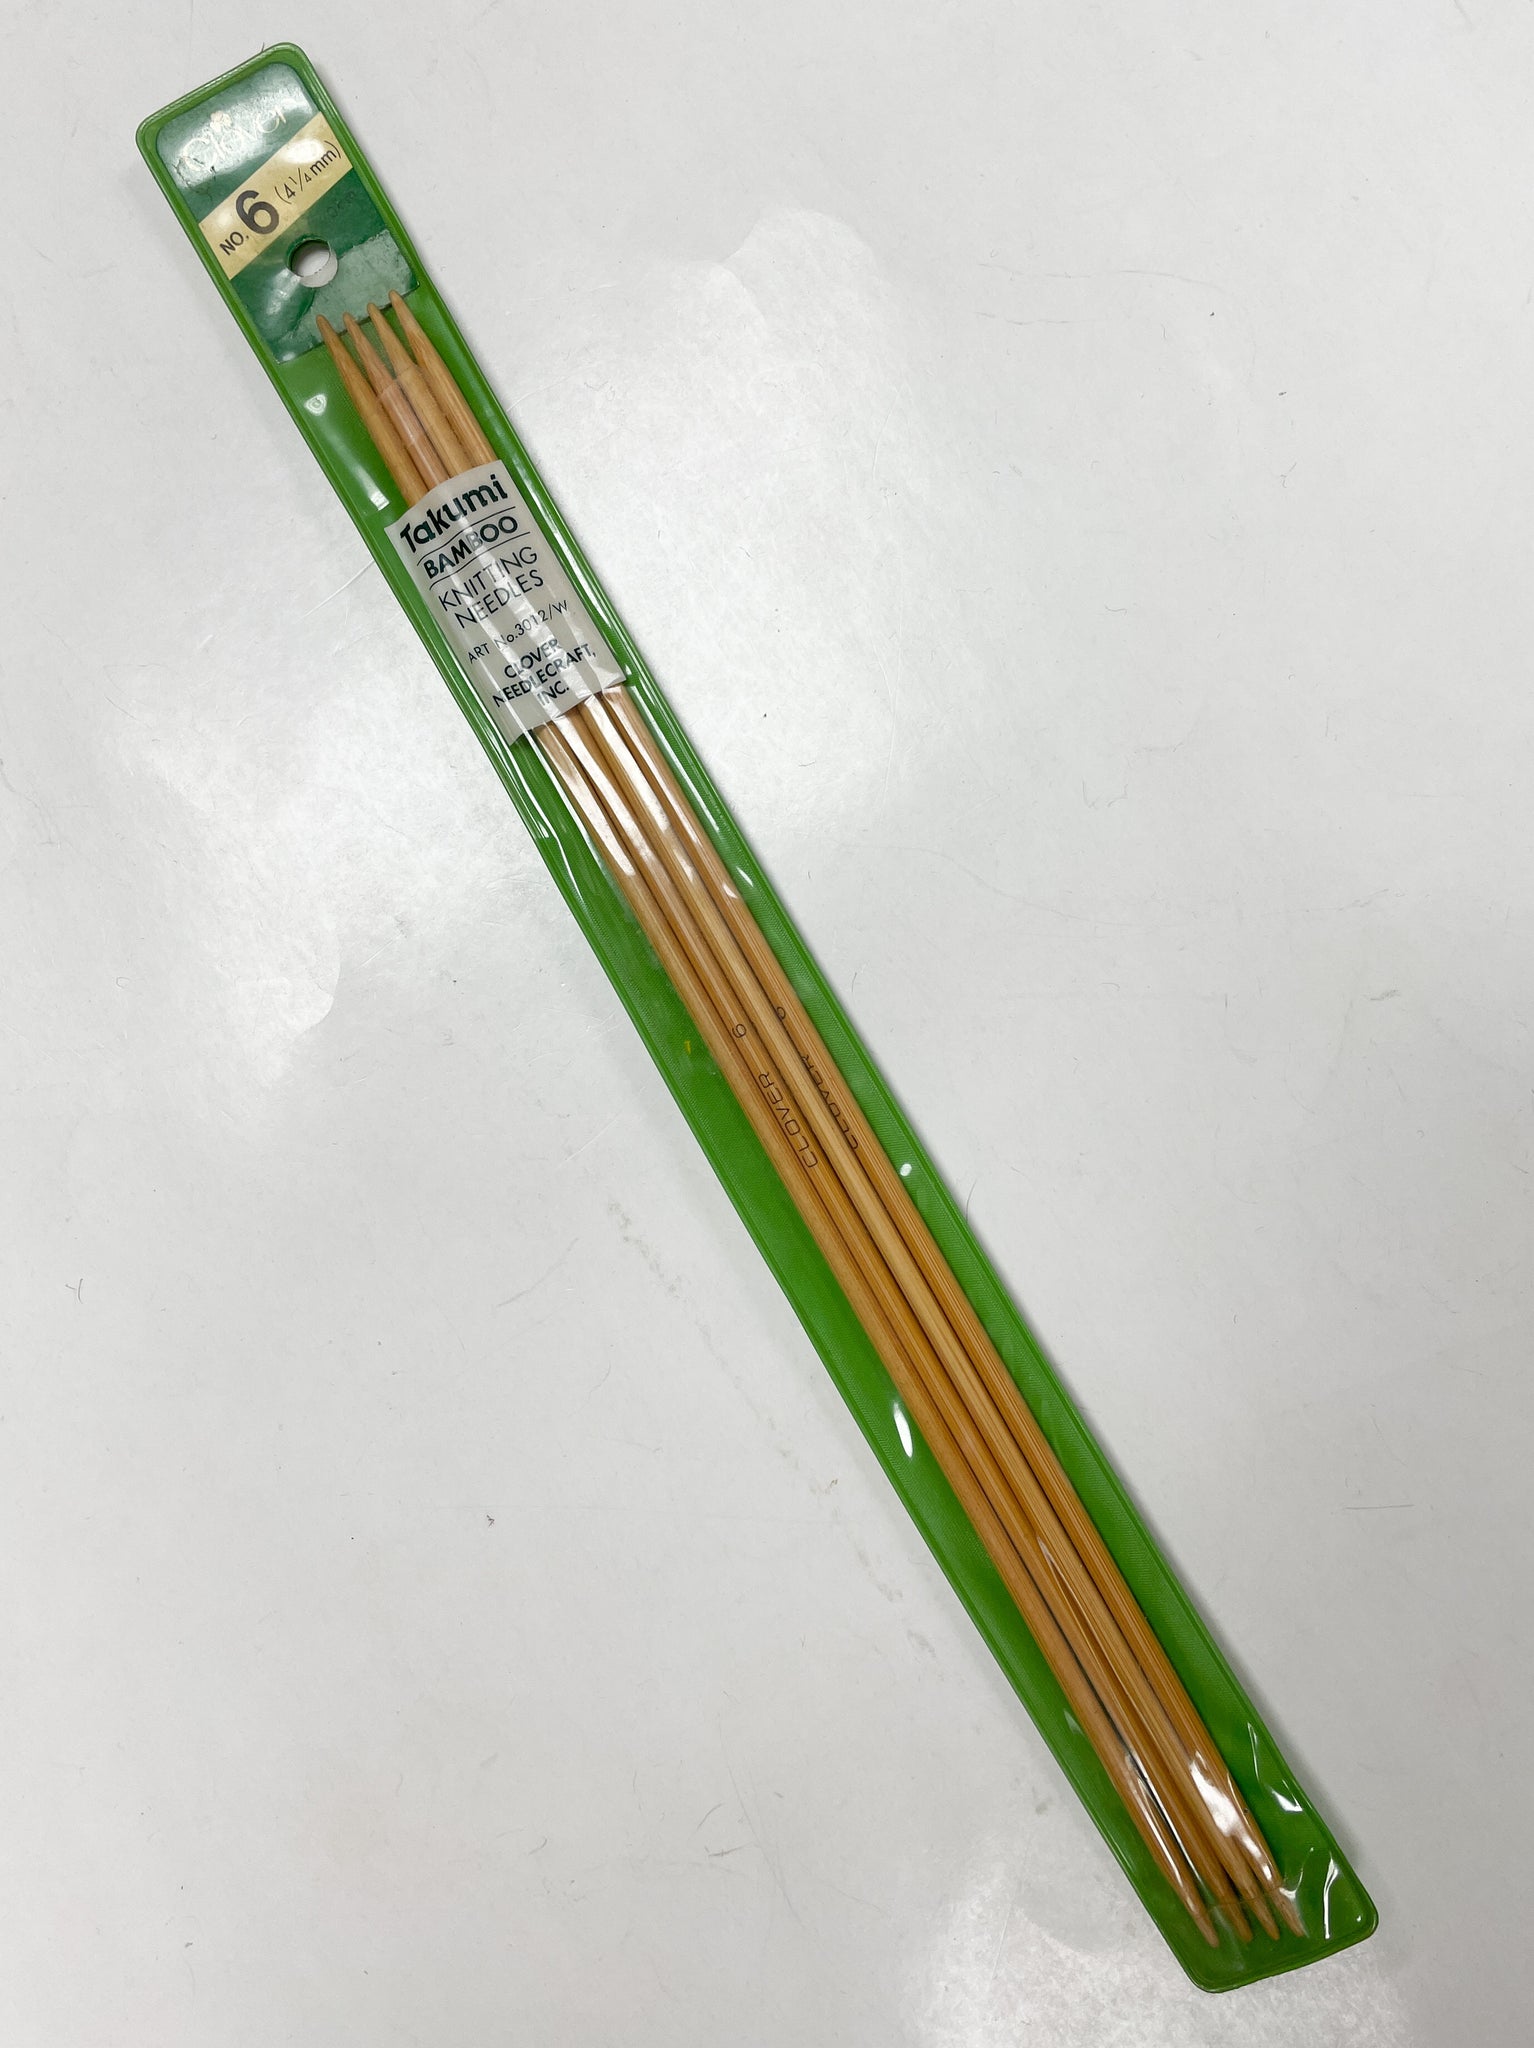 Bamboo Double Pointed Knitting Needles 12" - Size 6